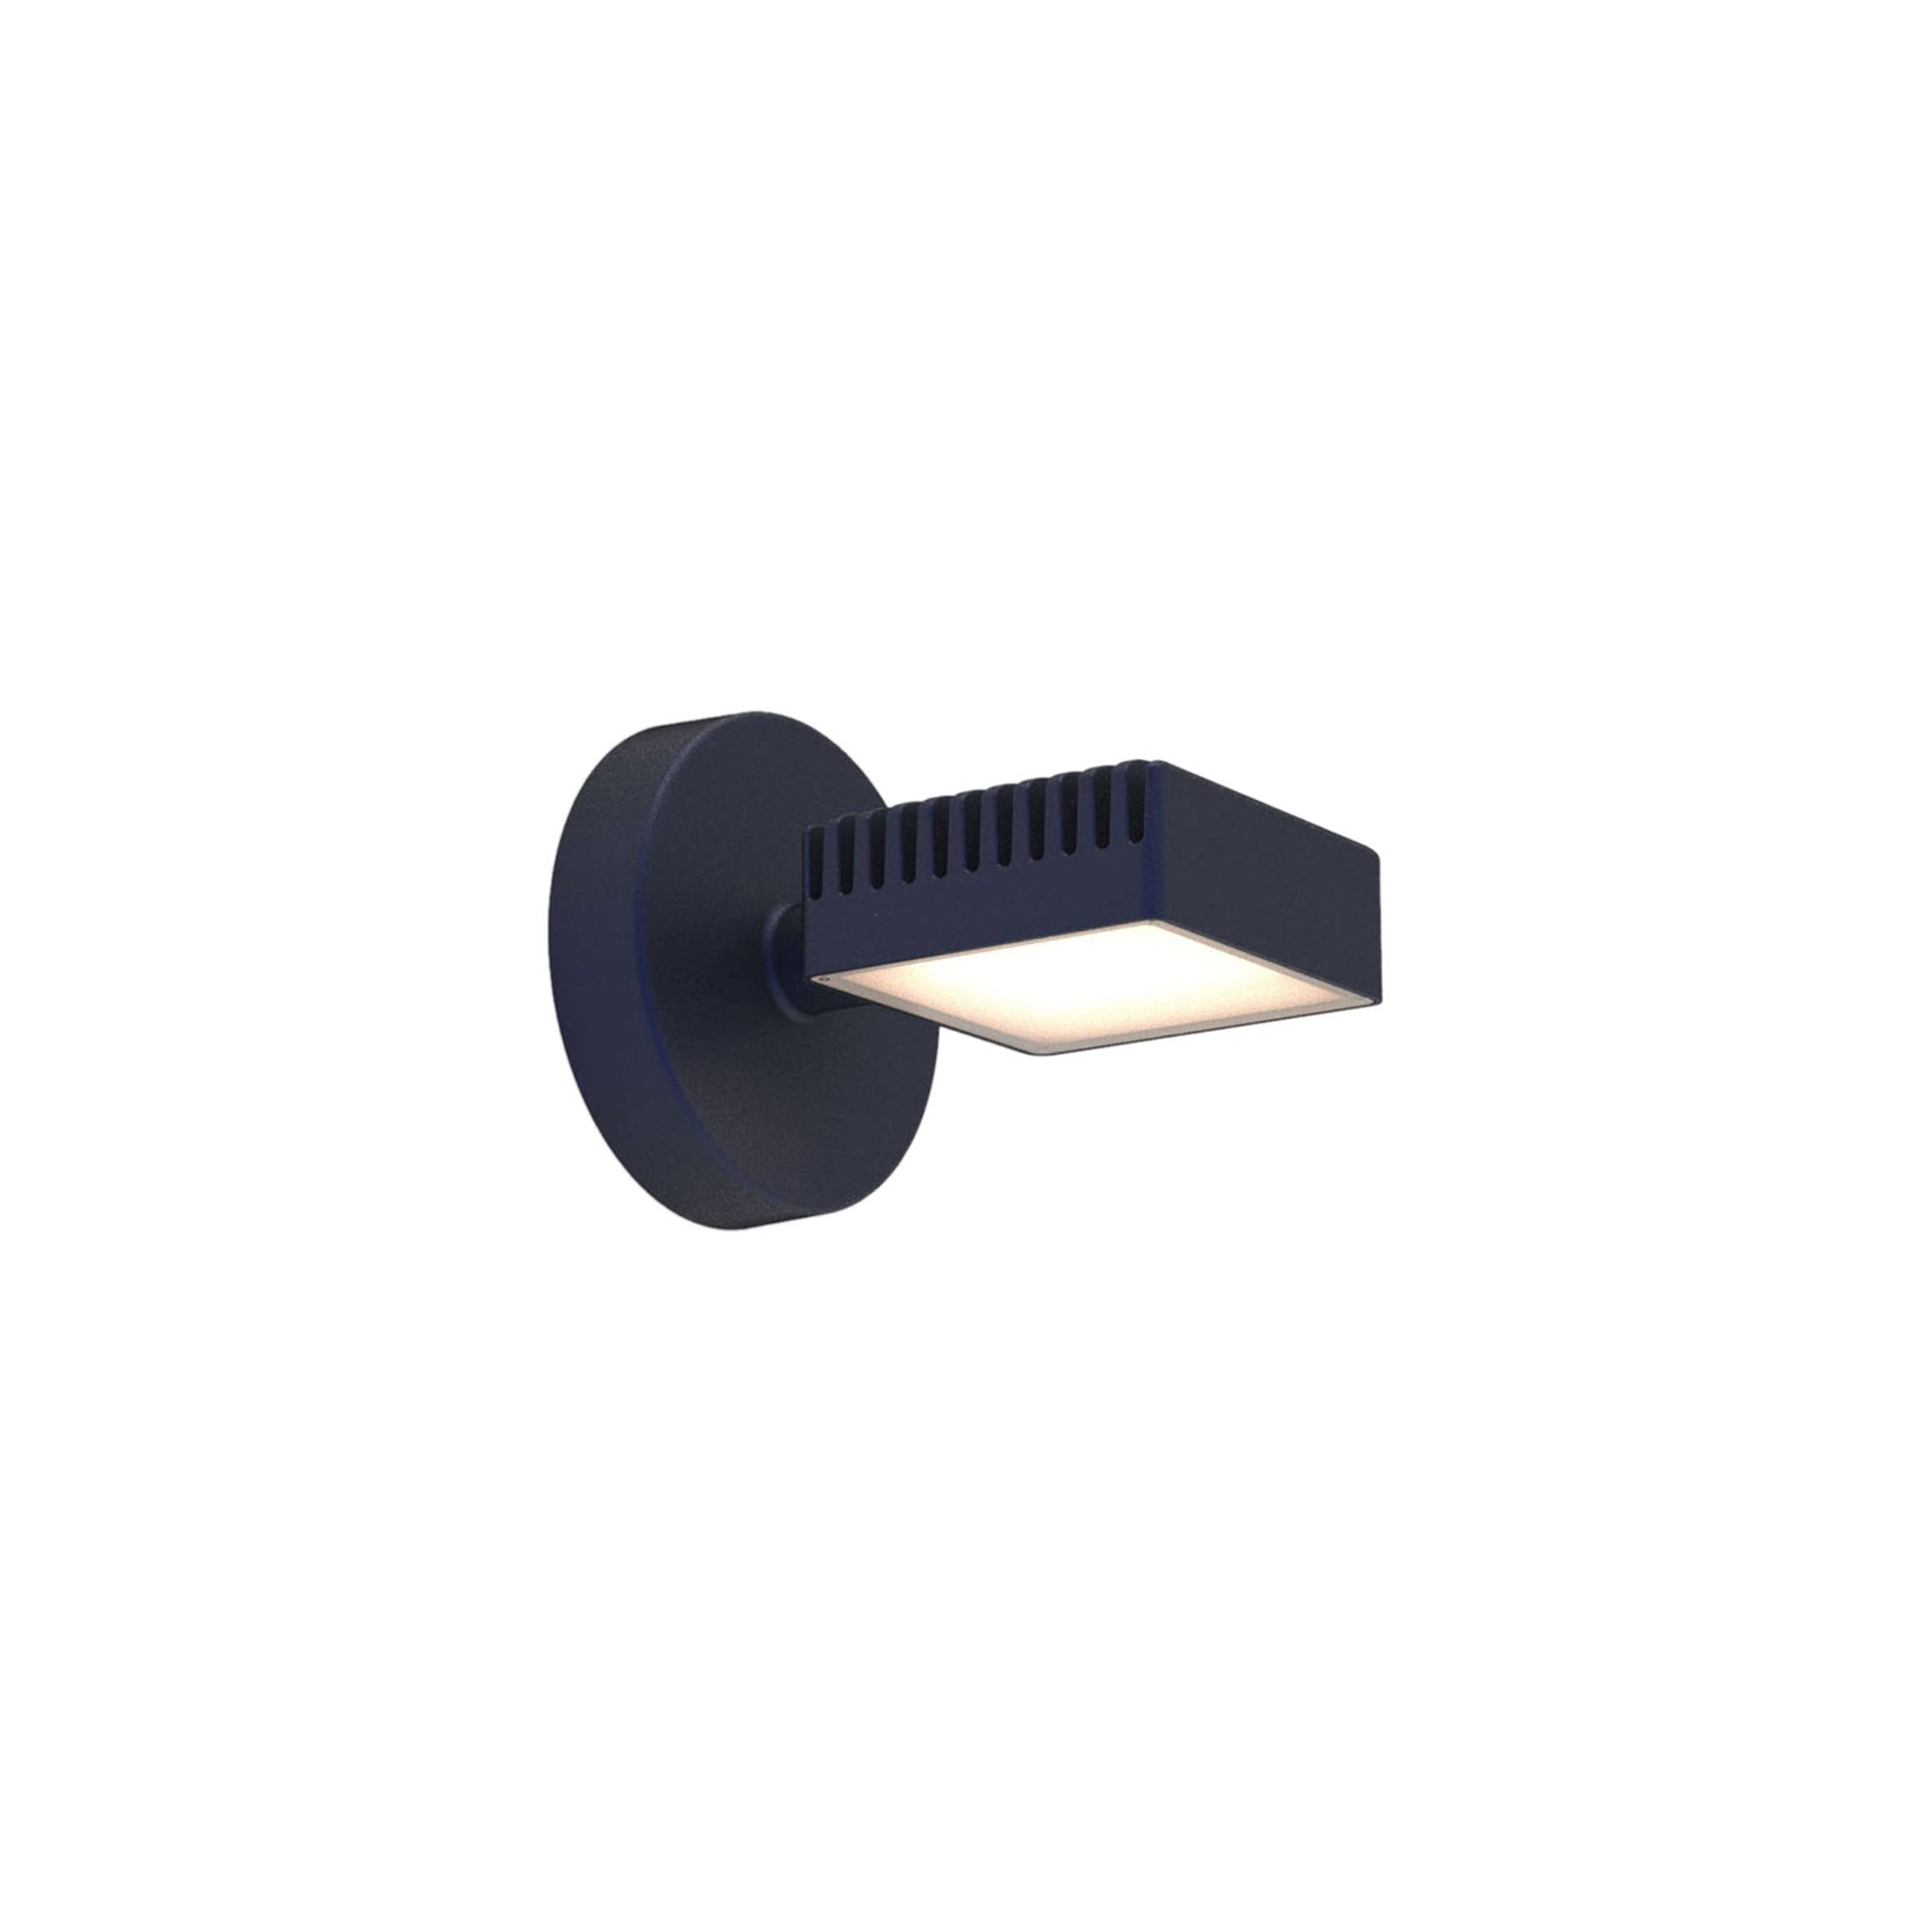 Dorval 04 Wall Lamp: Hardwire + Midnight Blue